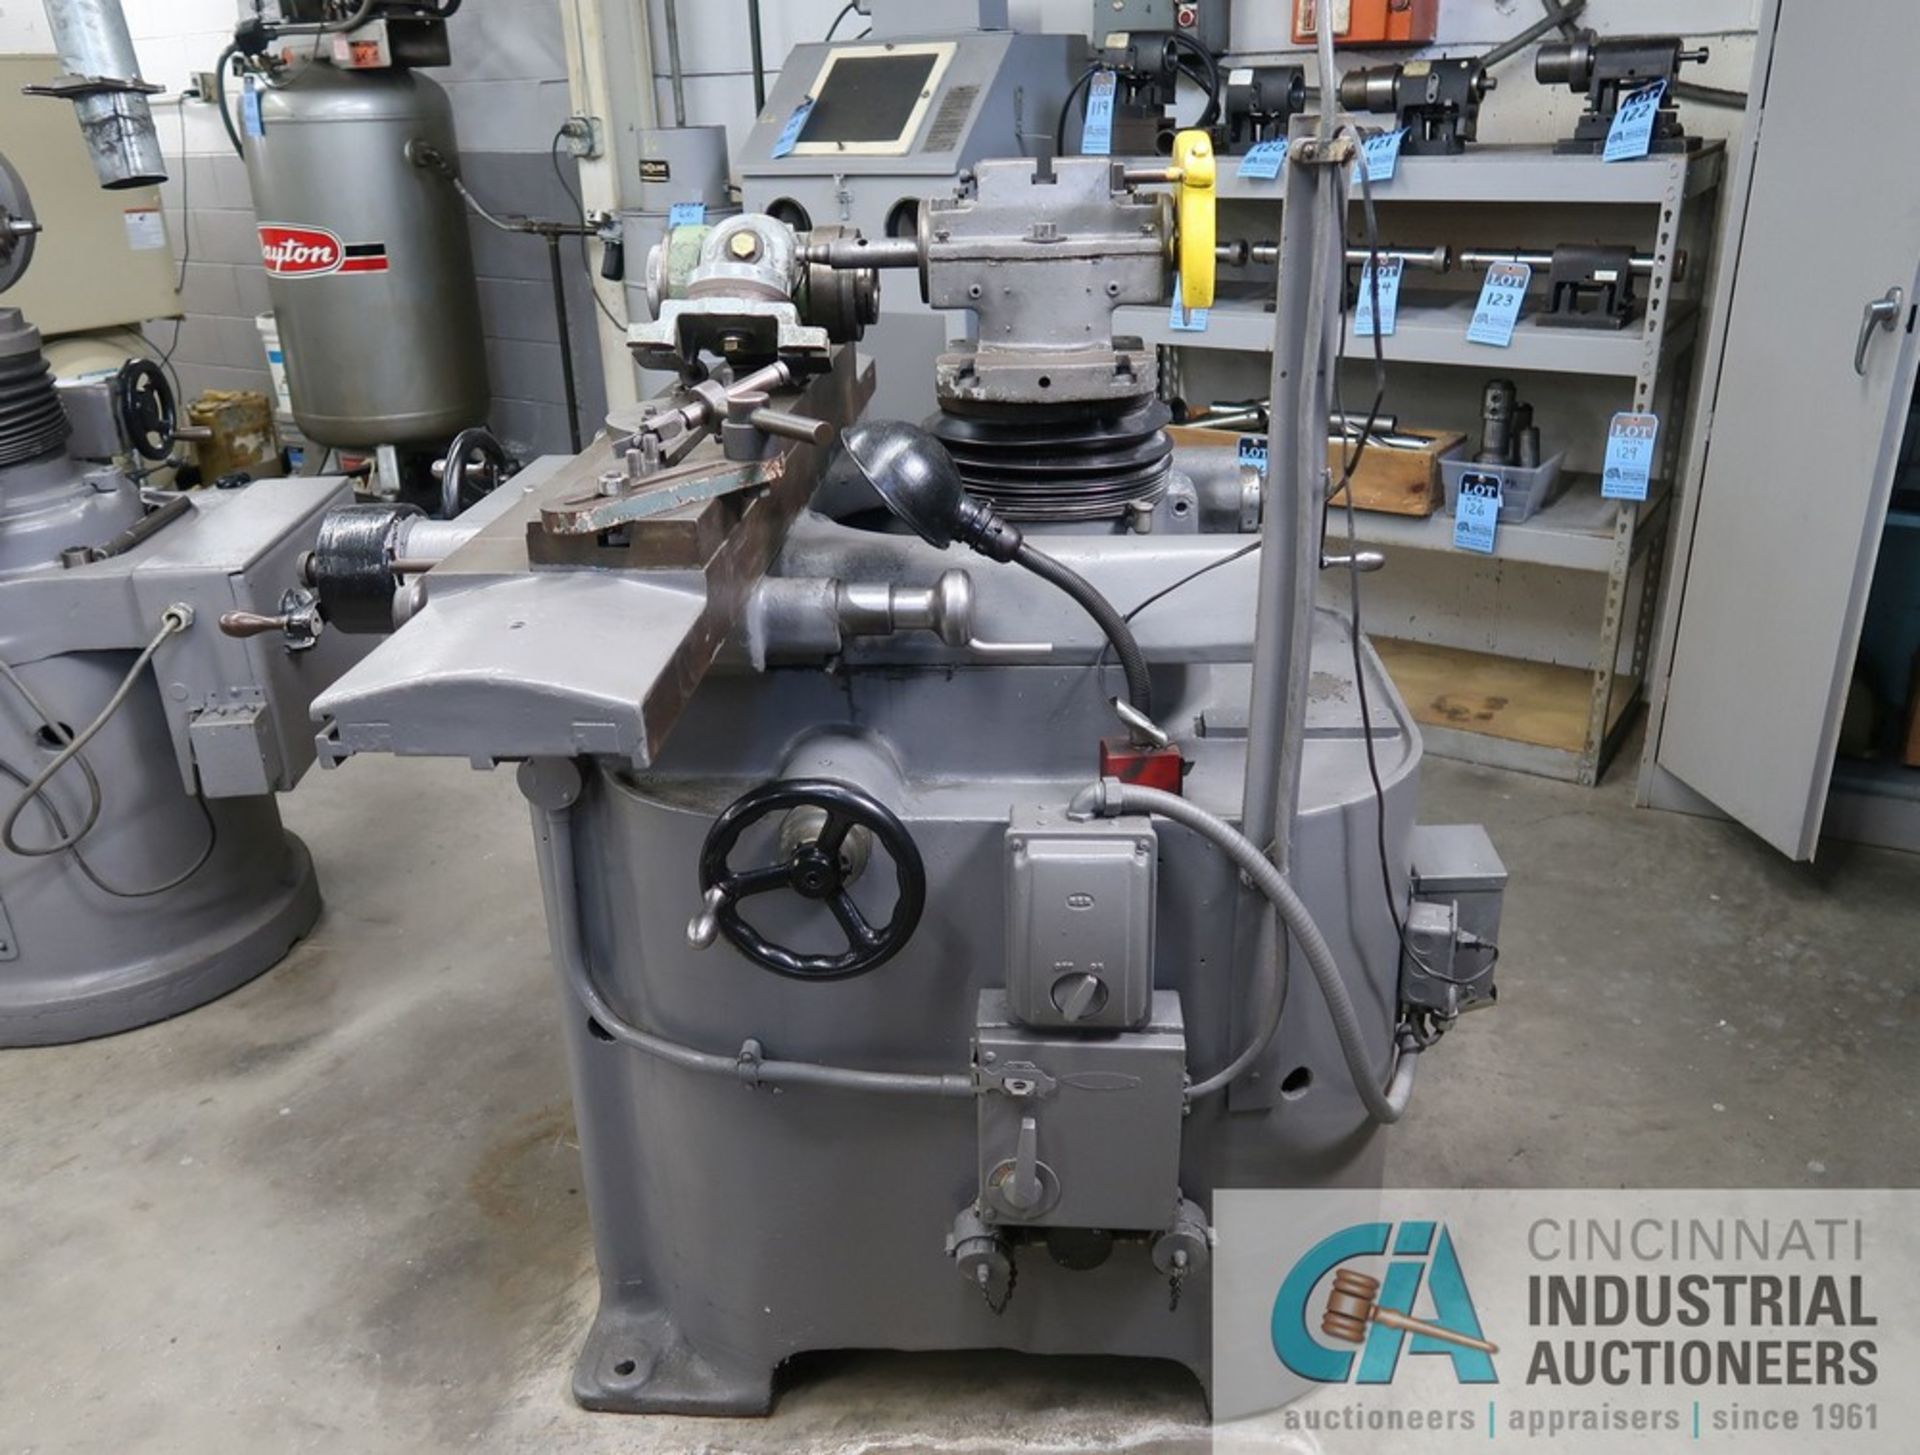 CINCINNATI MODEL NO. 2 UNIVERSAL TOOL GRINDER; S/N 102T1Y-162, WITH ATTACHMENTS AND 5-1/2" X 36" T- - Image 2 of 10